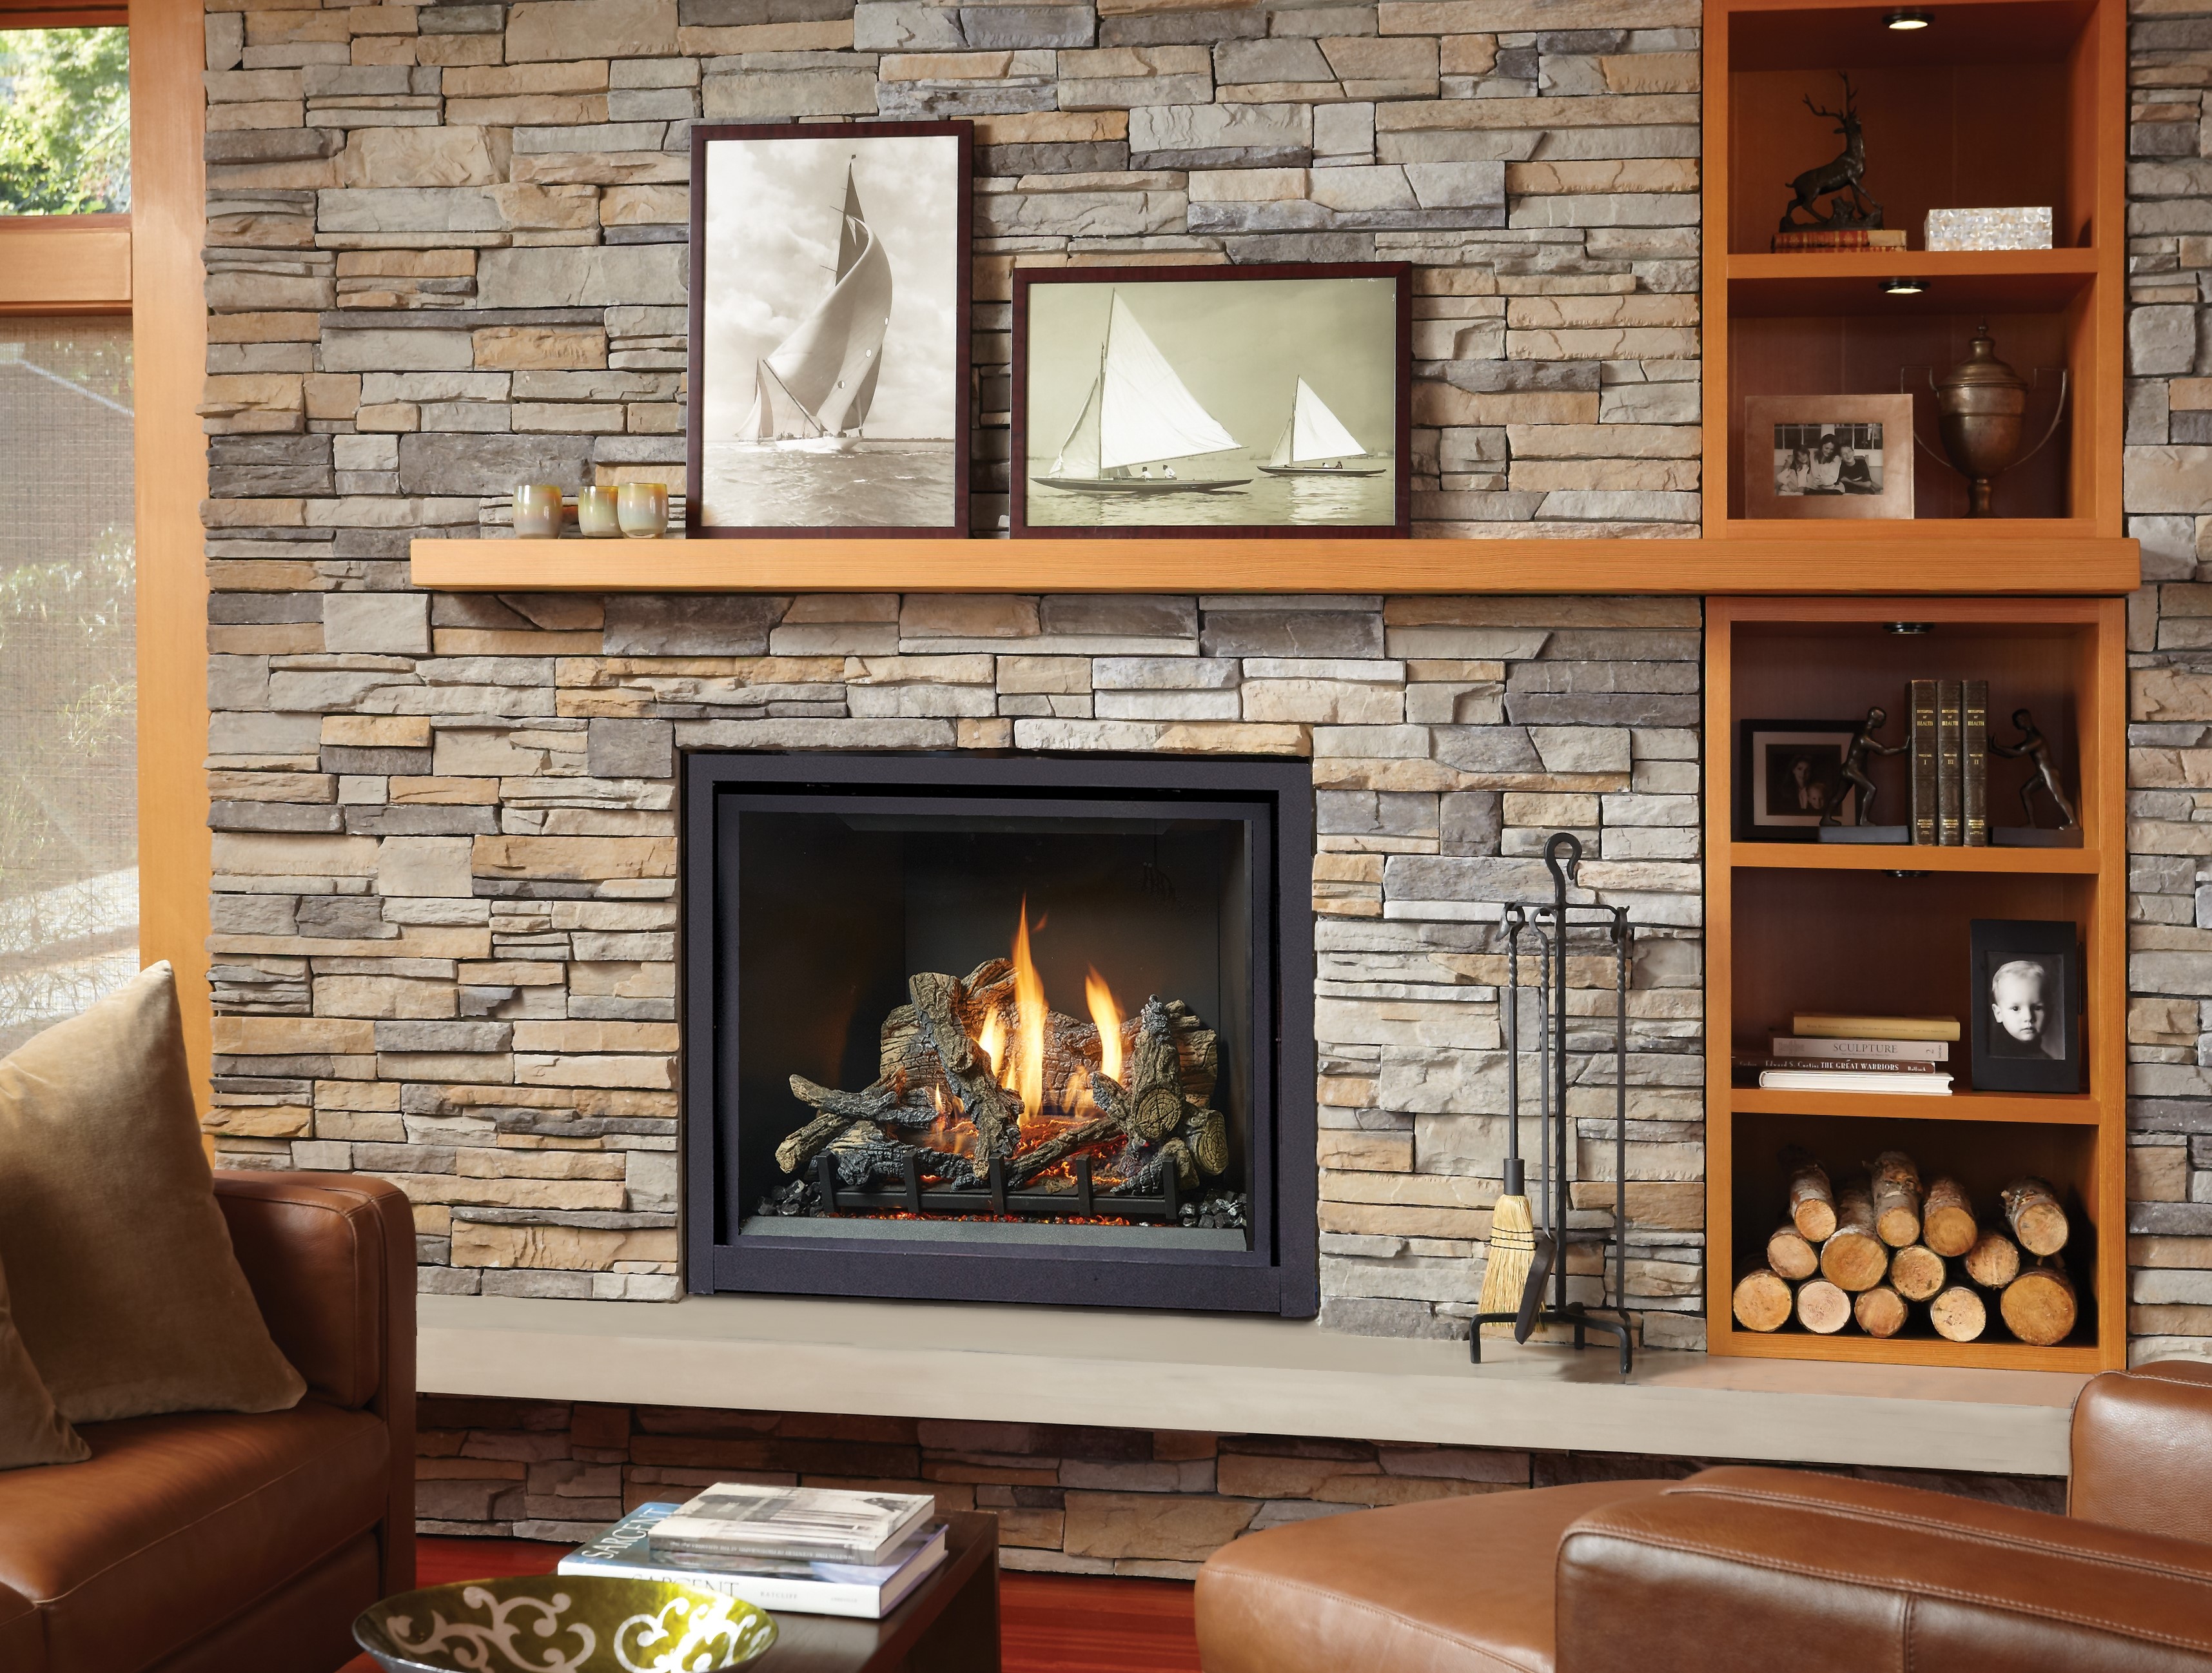 How to clean electric fireplace